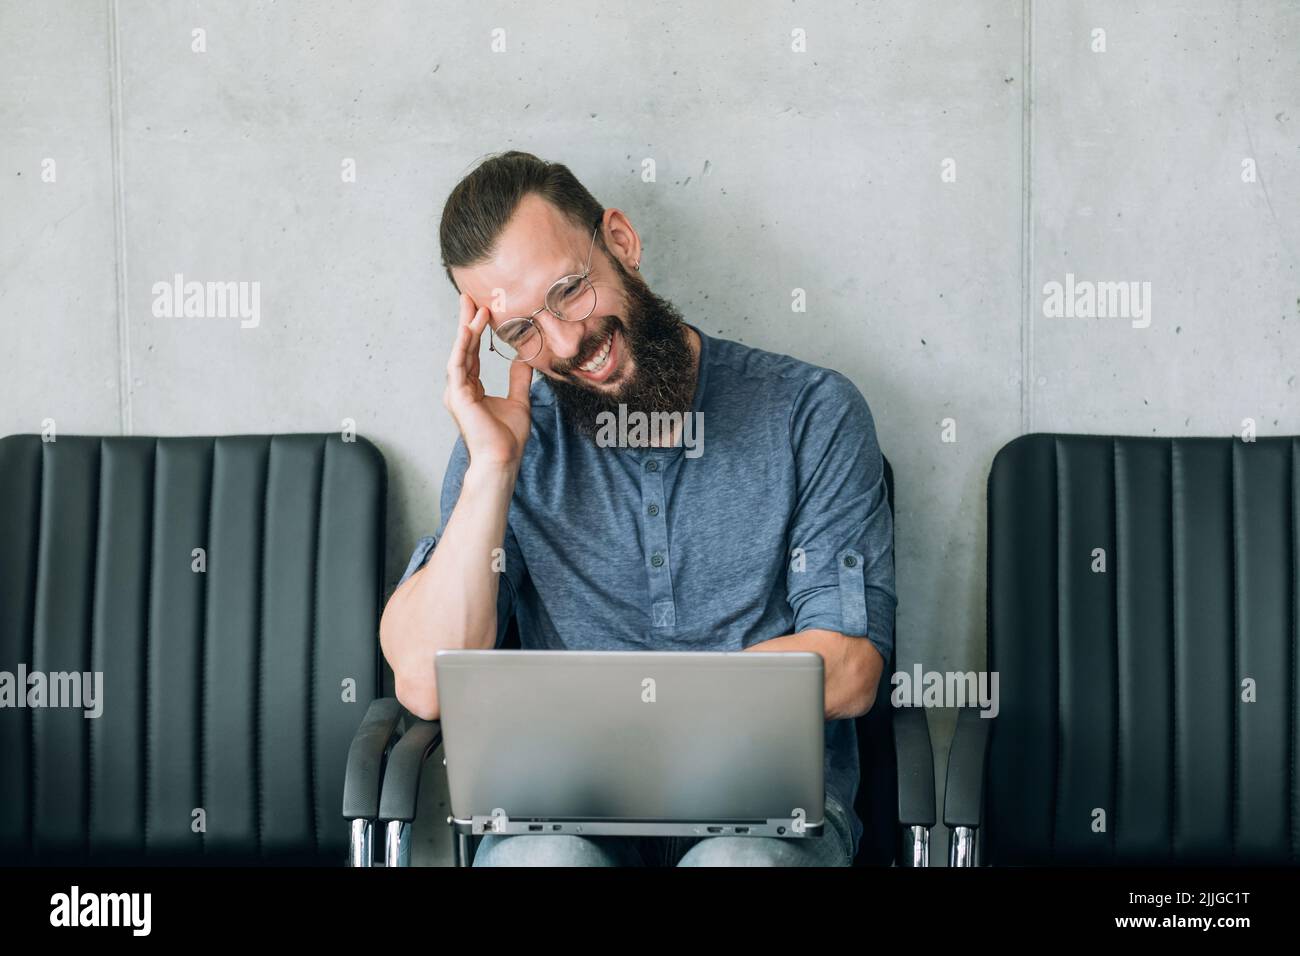 funny videos idle leisure man laughs watch laptop Stock Photo